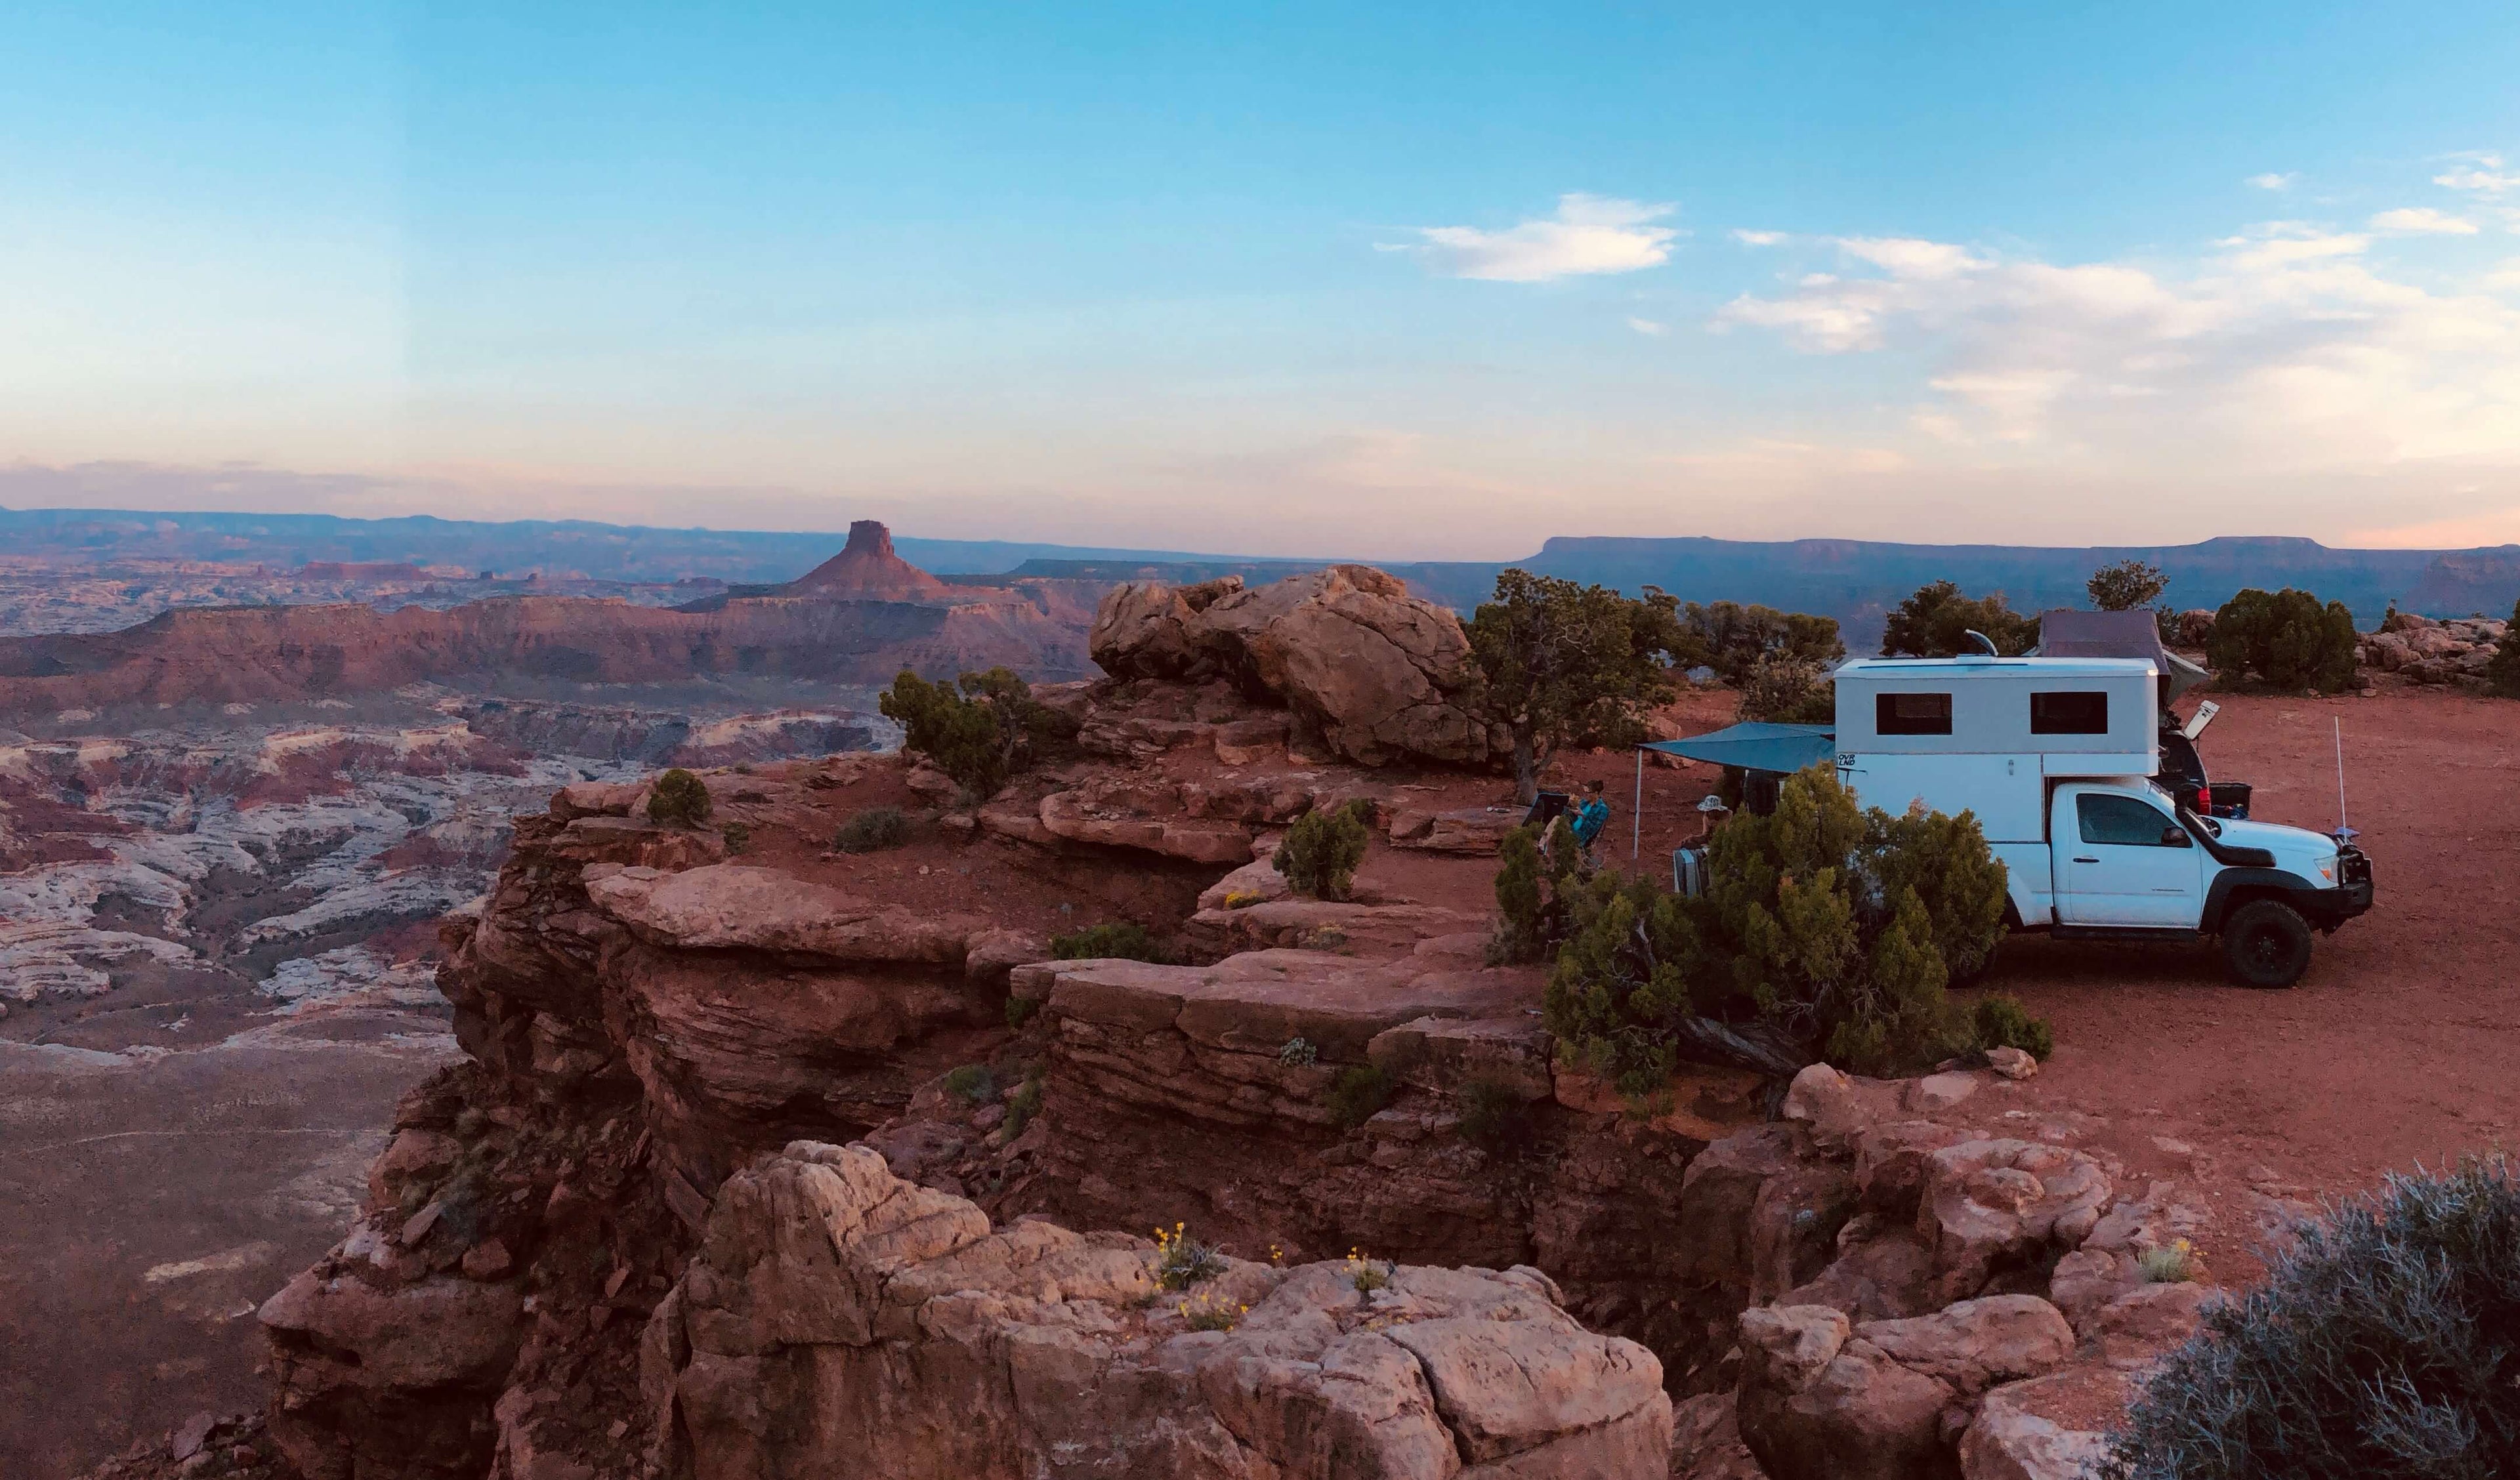 Cover photo with Pop-up camper on cliff edge. The truck is a white Toyota Tacoma with white camper.